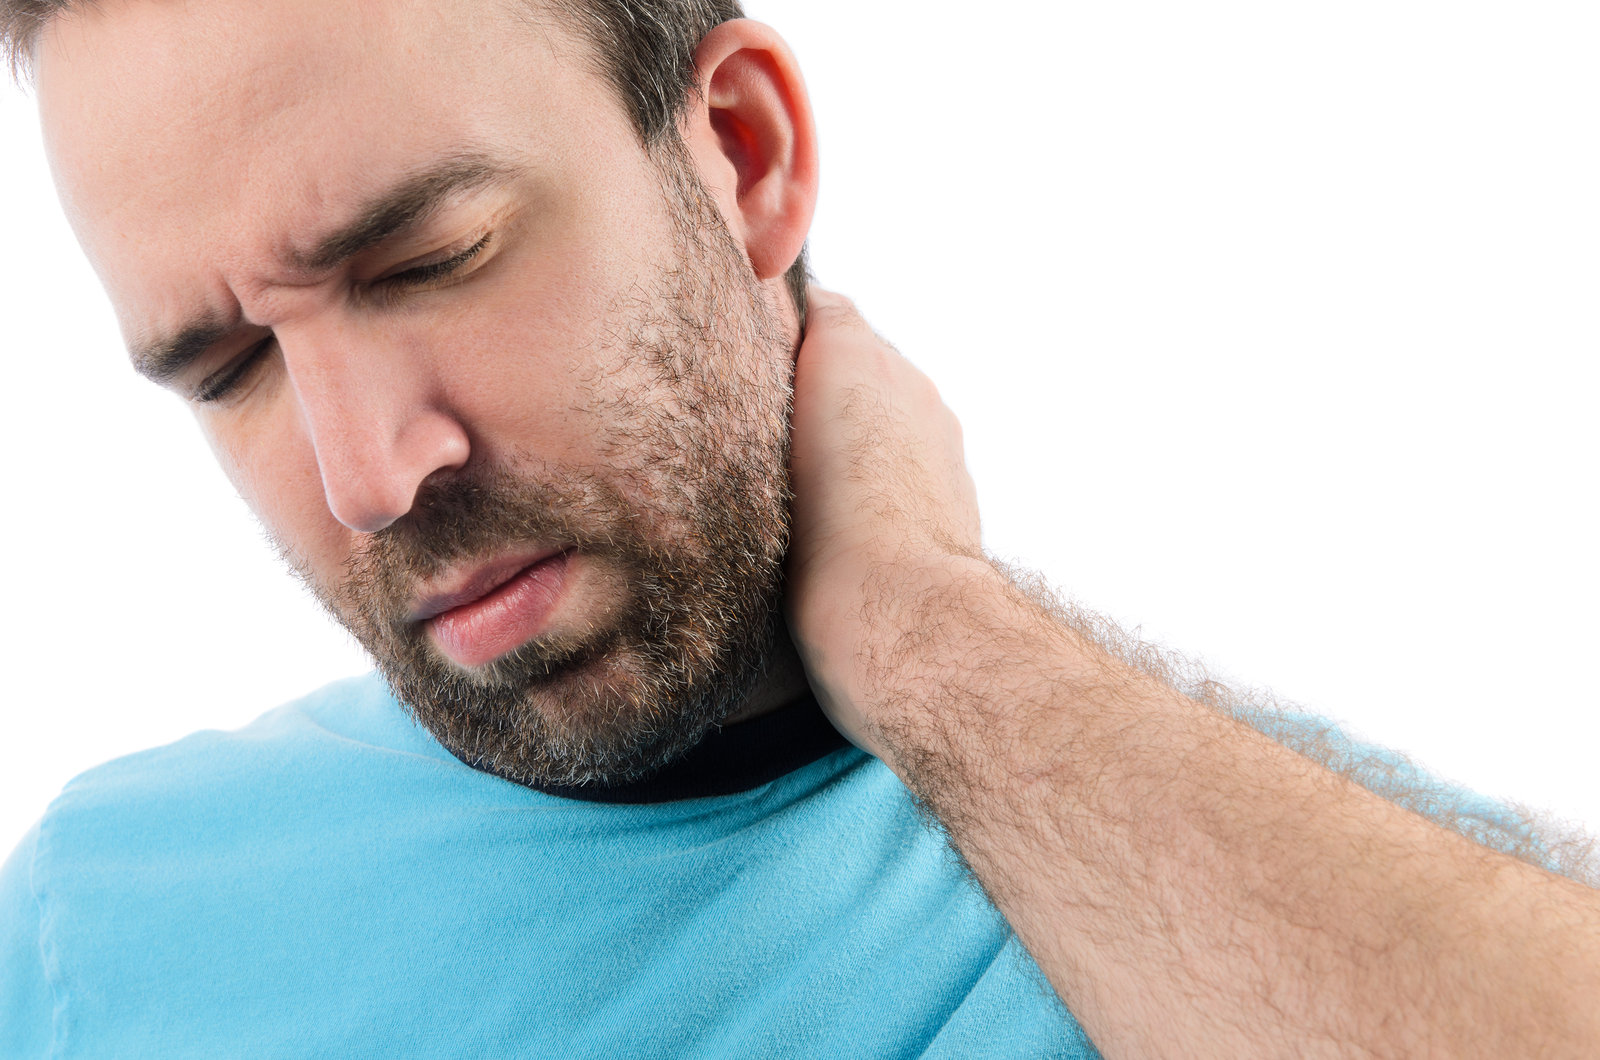 typical compensation for whiplash injury